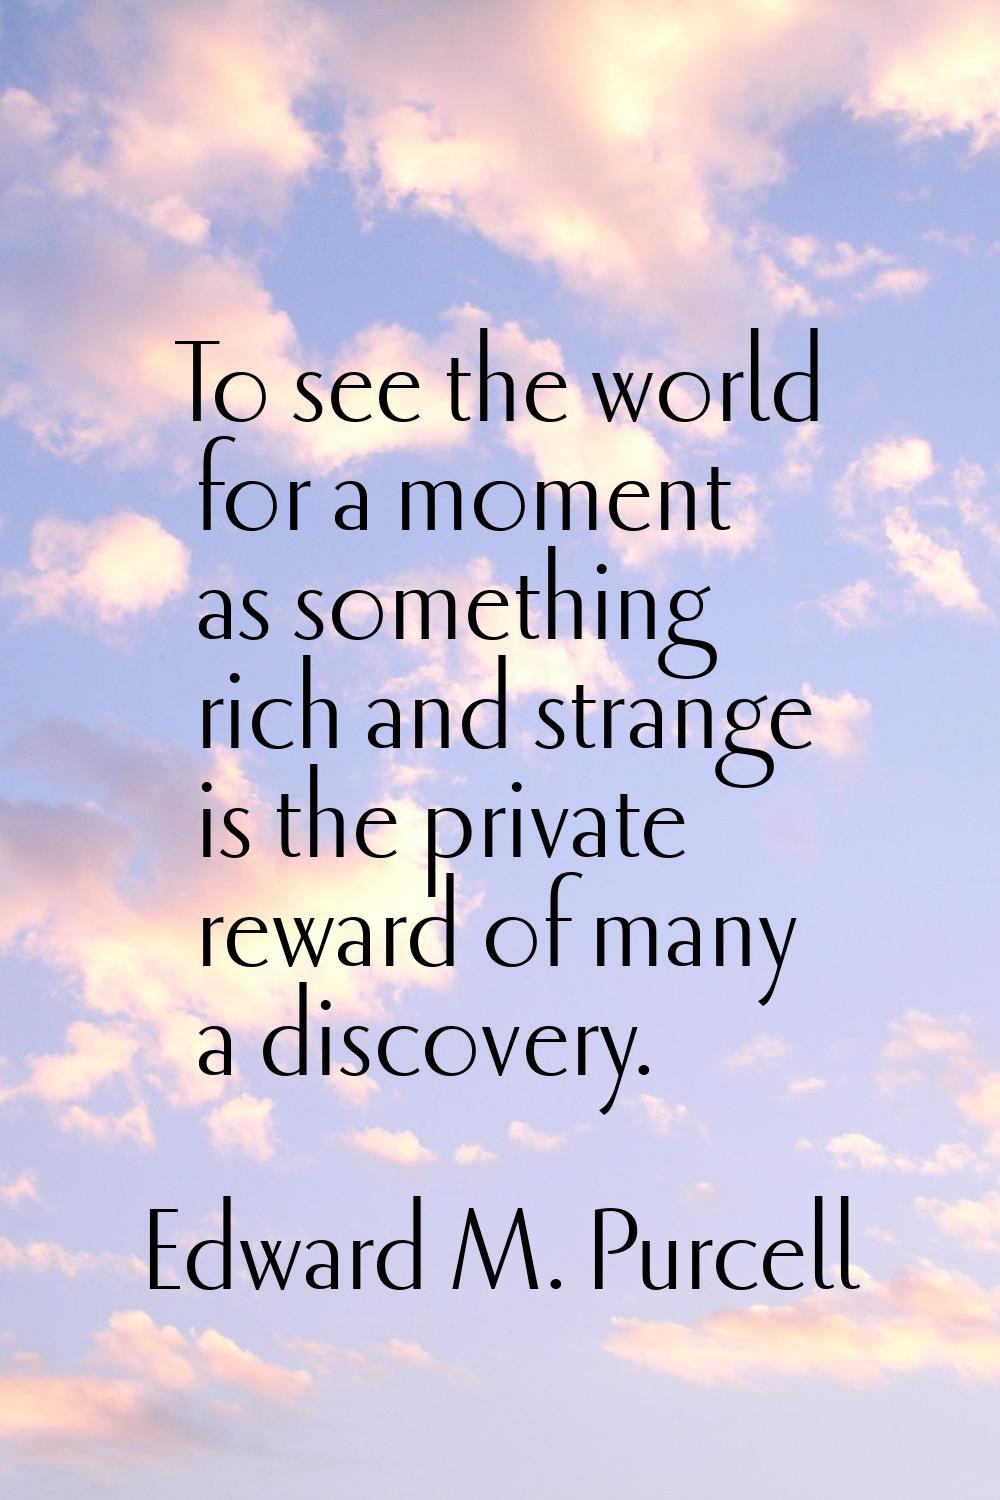 To see the world for a moment as something rich and strange is the private reward of many a discove